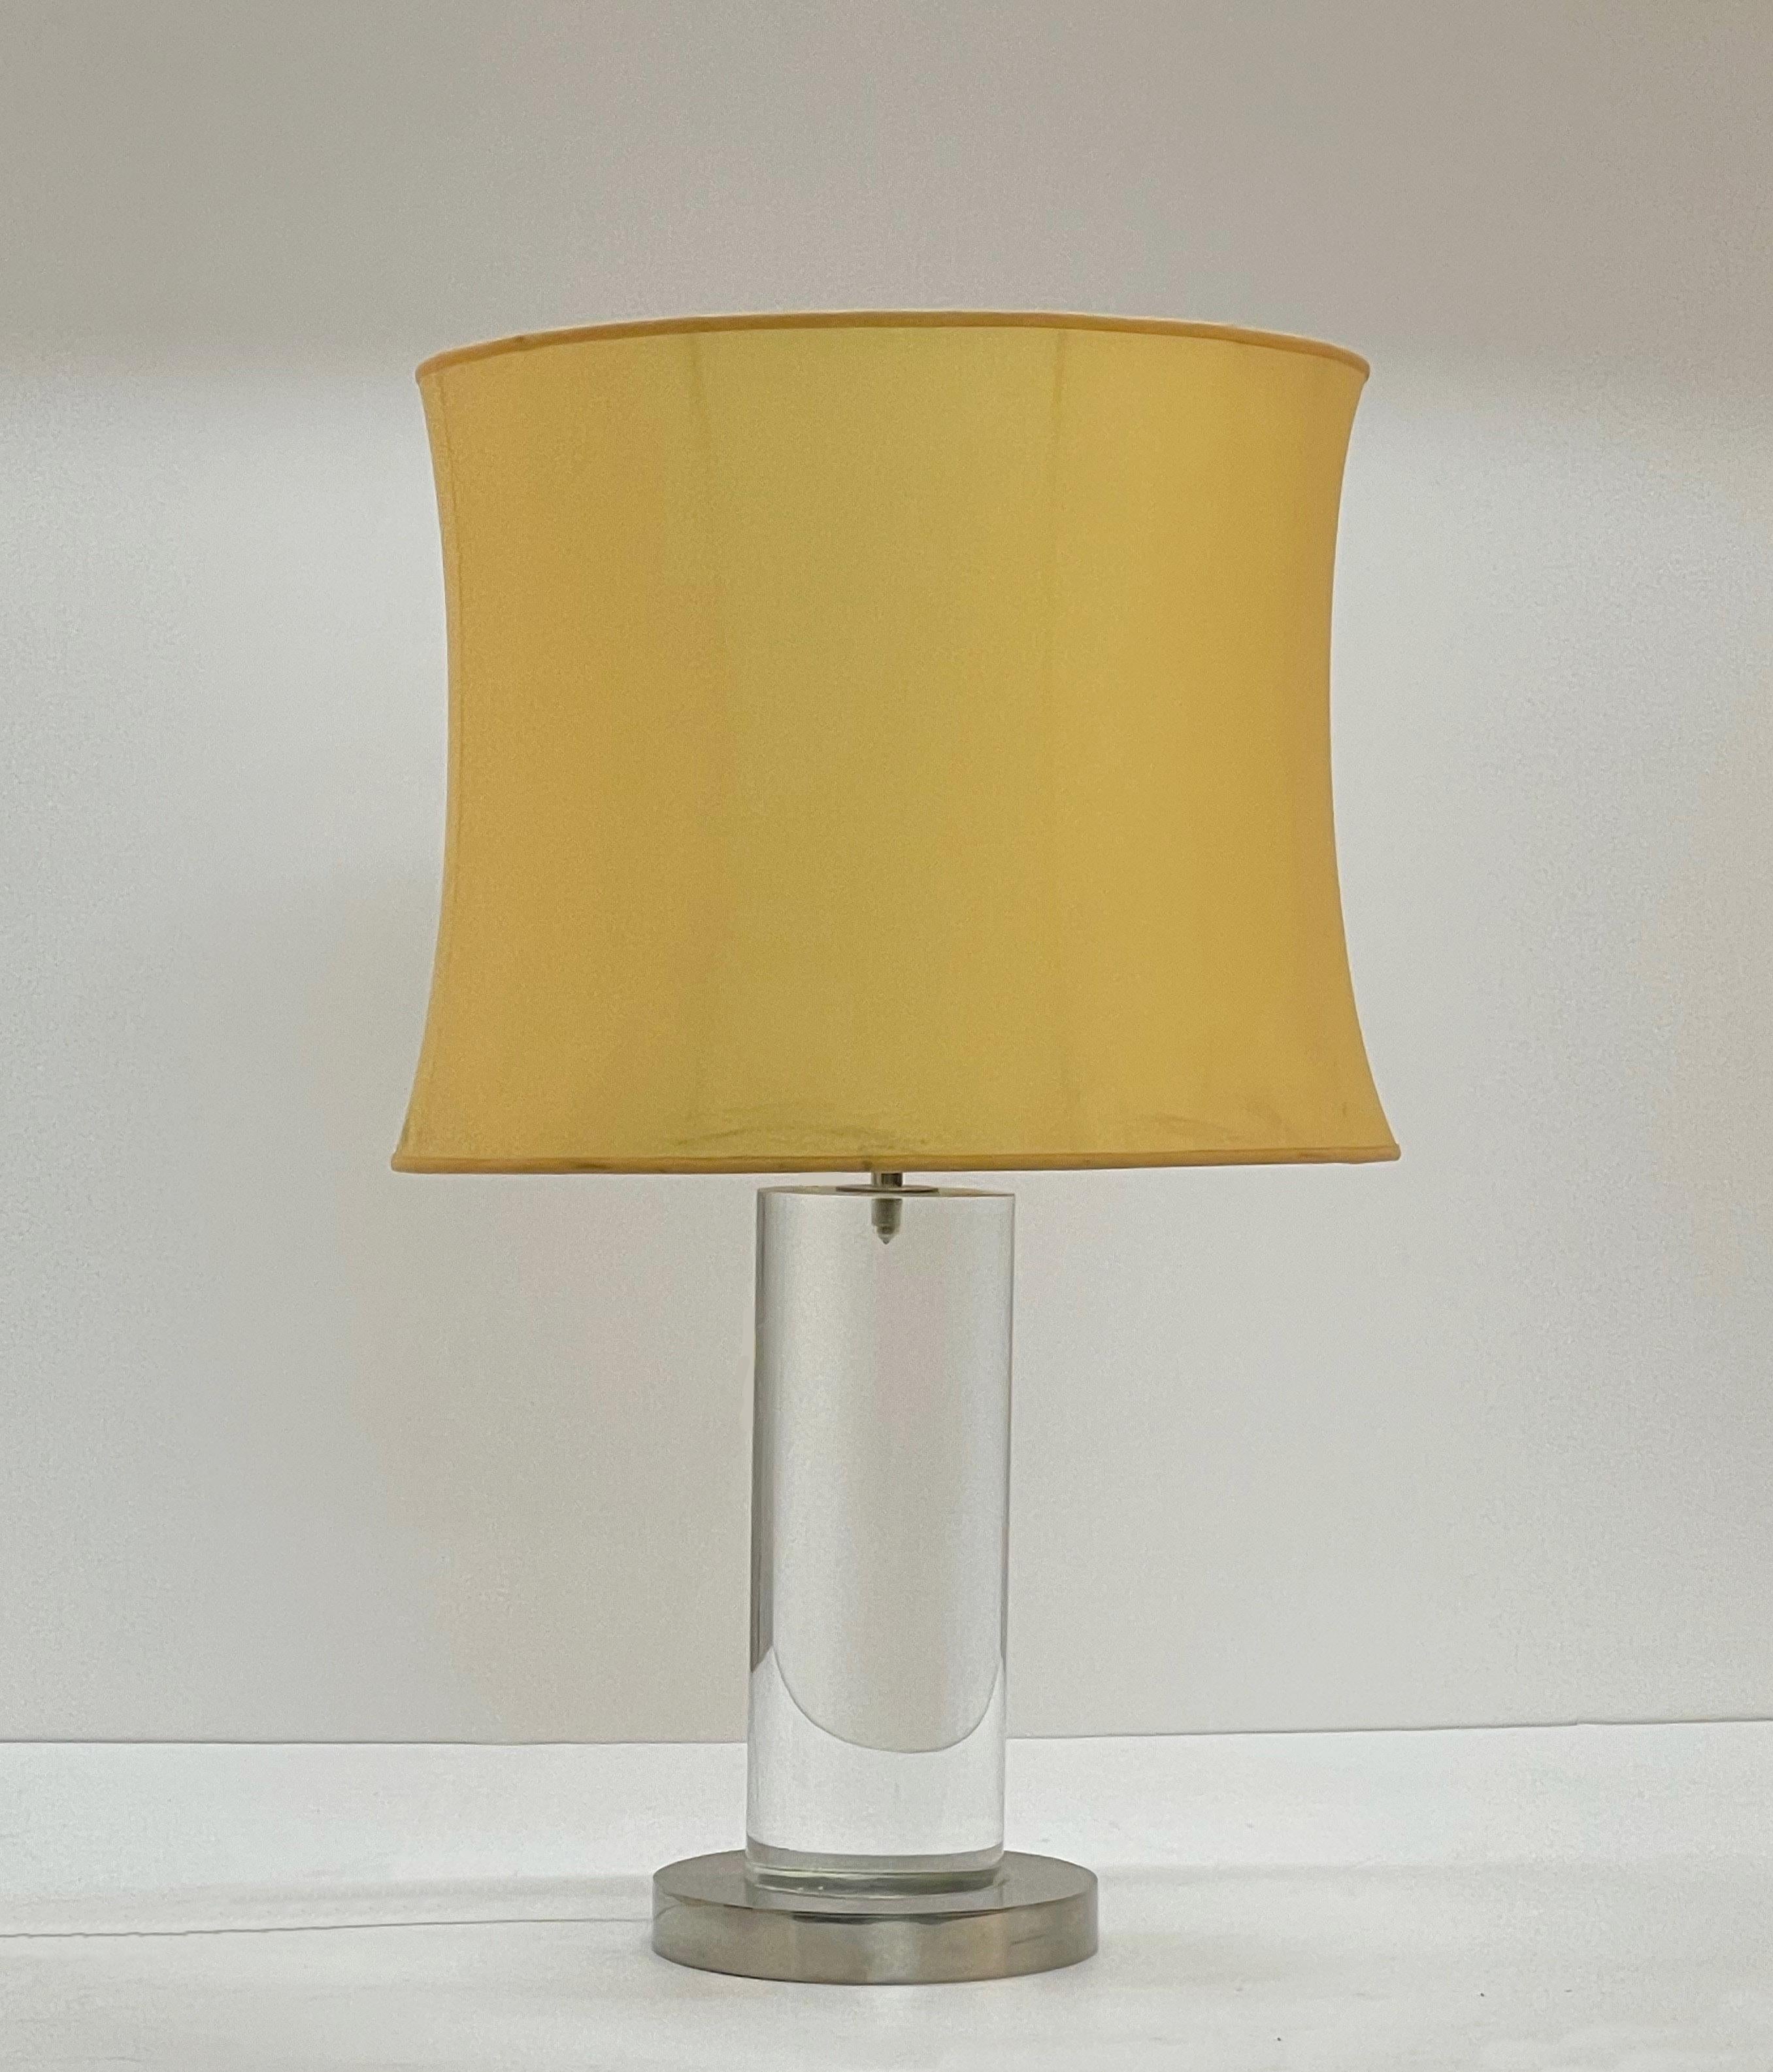 Romeo Rega Midcentury Italian Table Lamp with Lucite Column and Brass Base 1970s For Sale 6